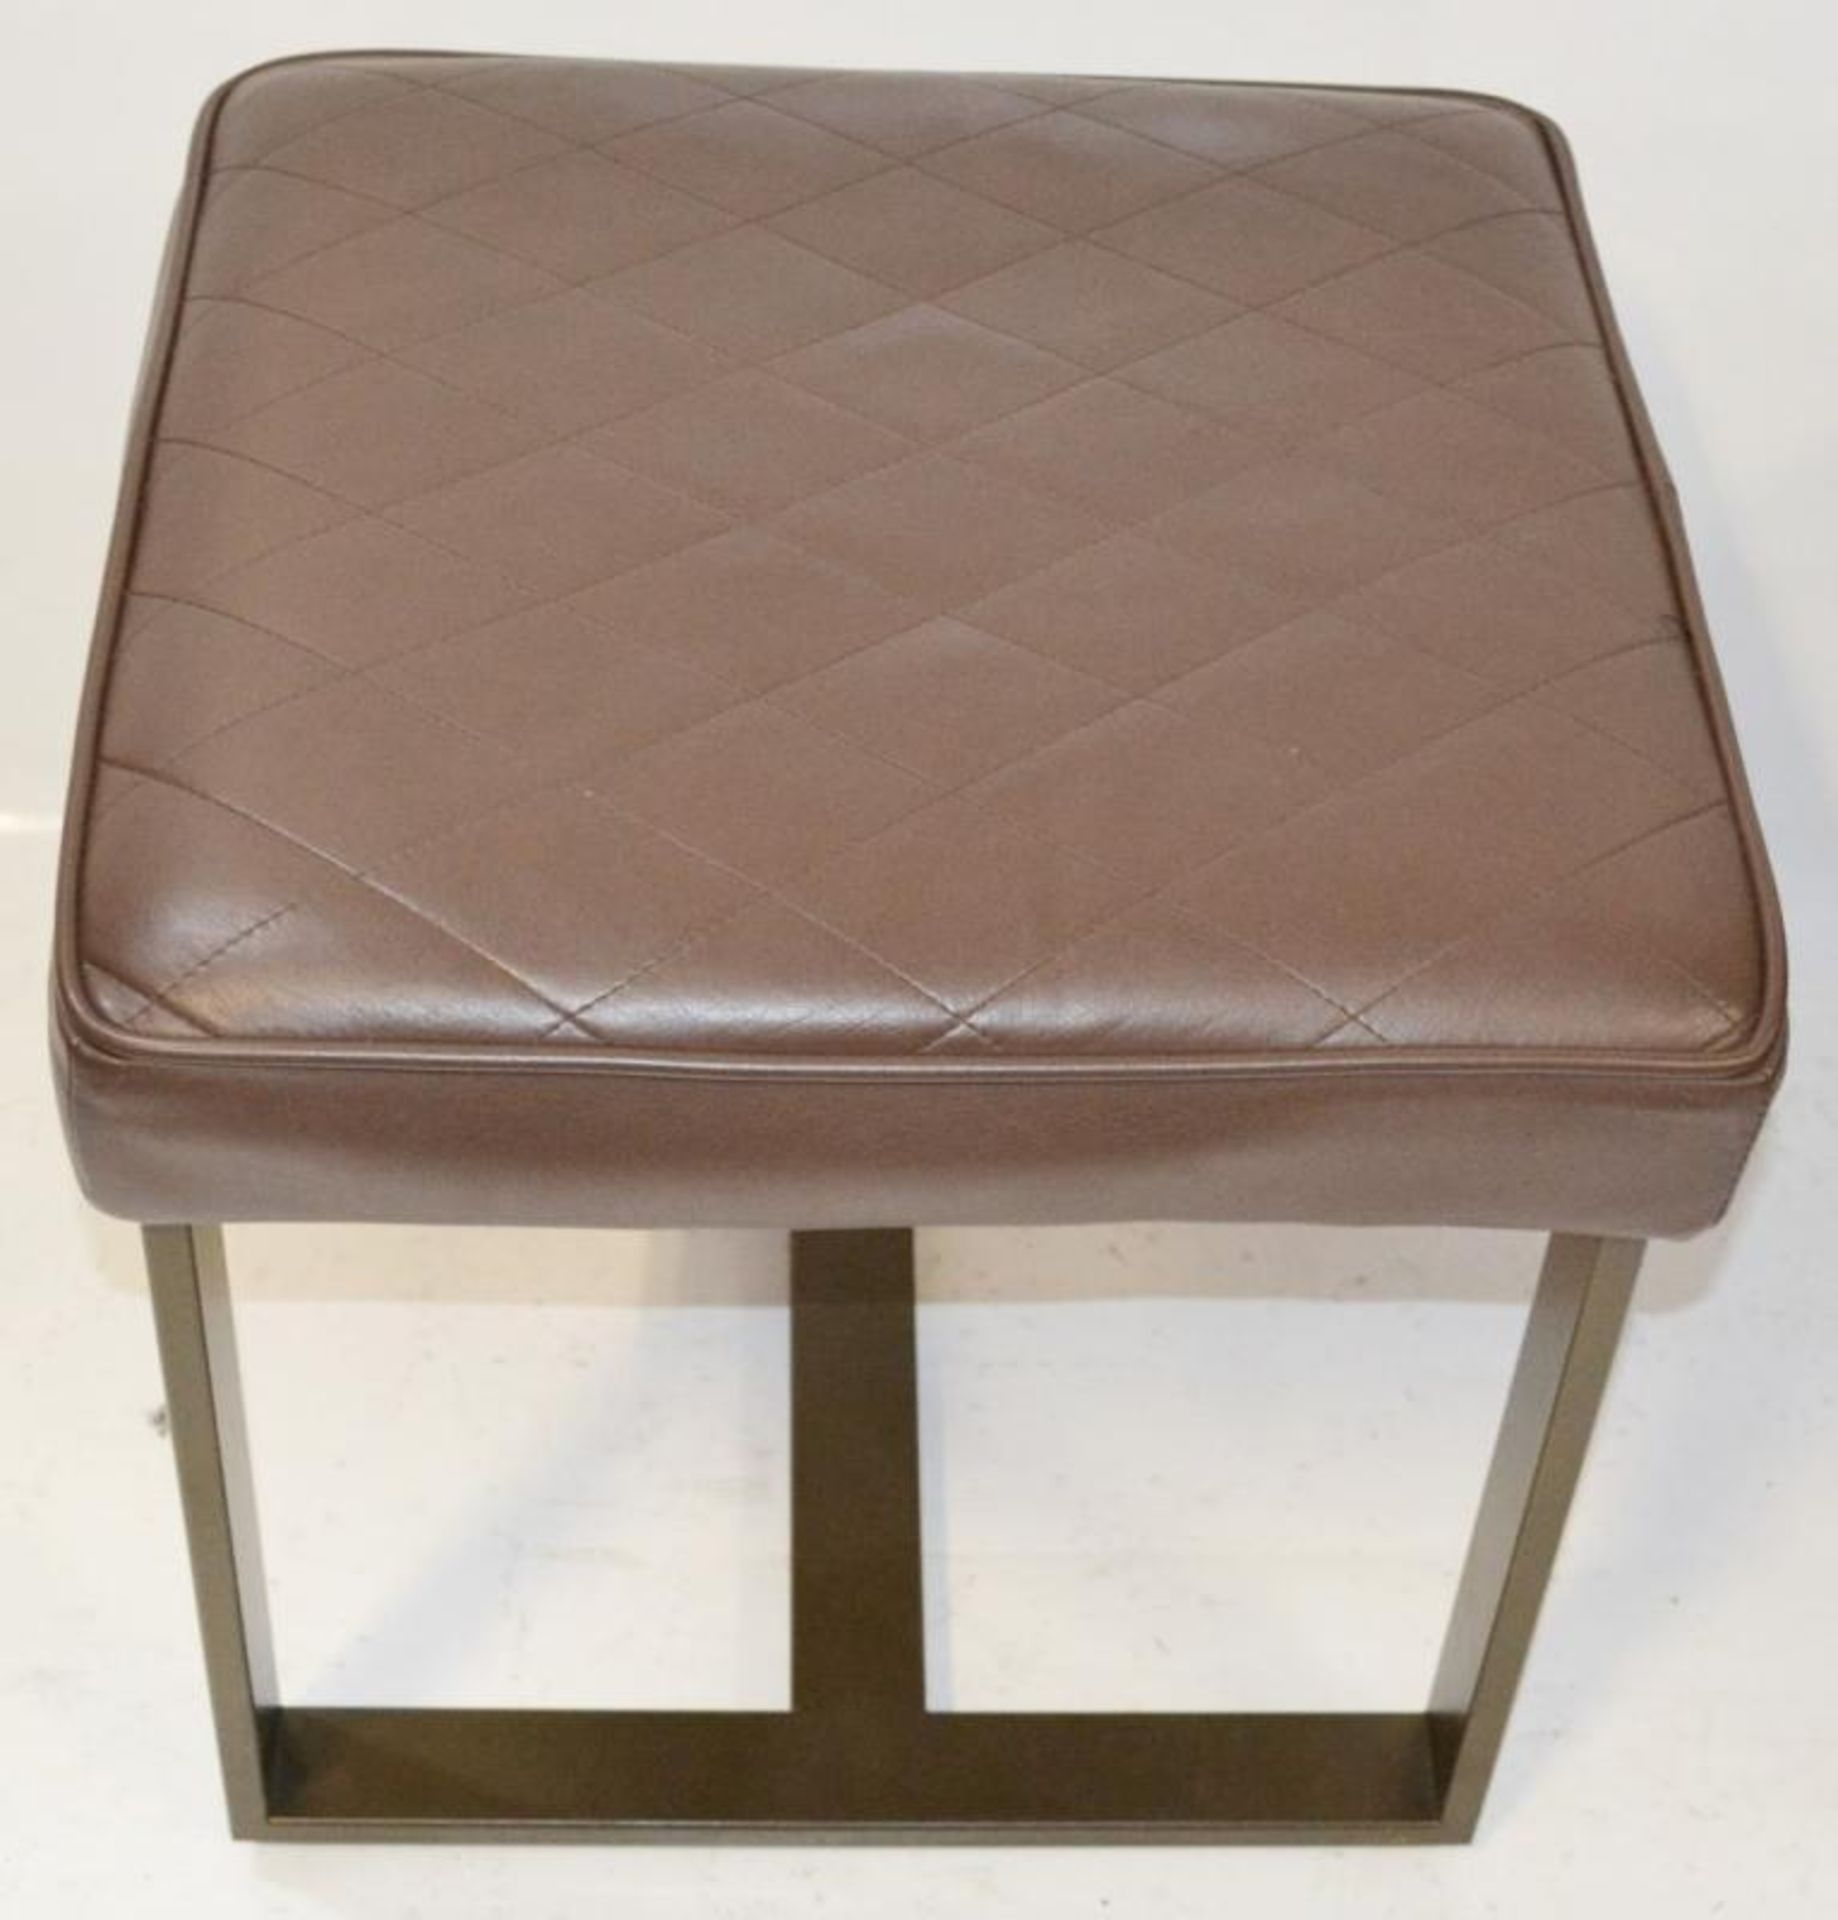 Pair Of Upholstered Stools In A Brown Faux Leather - Recently Removed From A Major UK Store In Very - Image 3 of 5